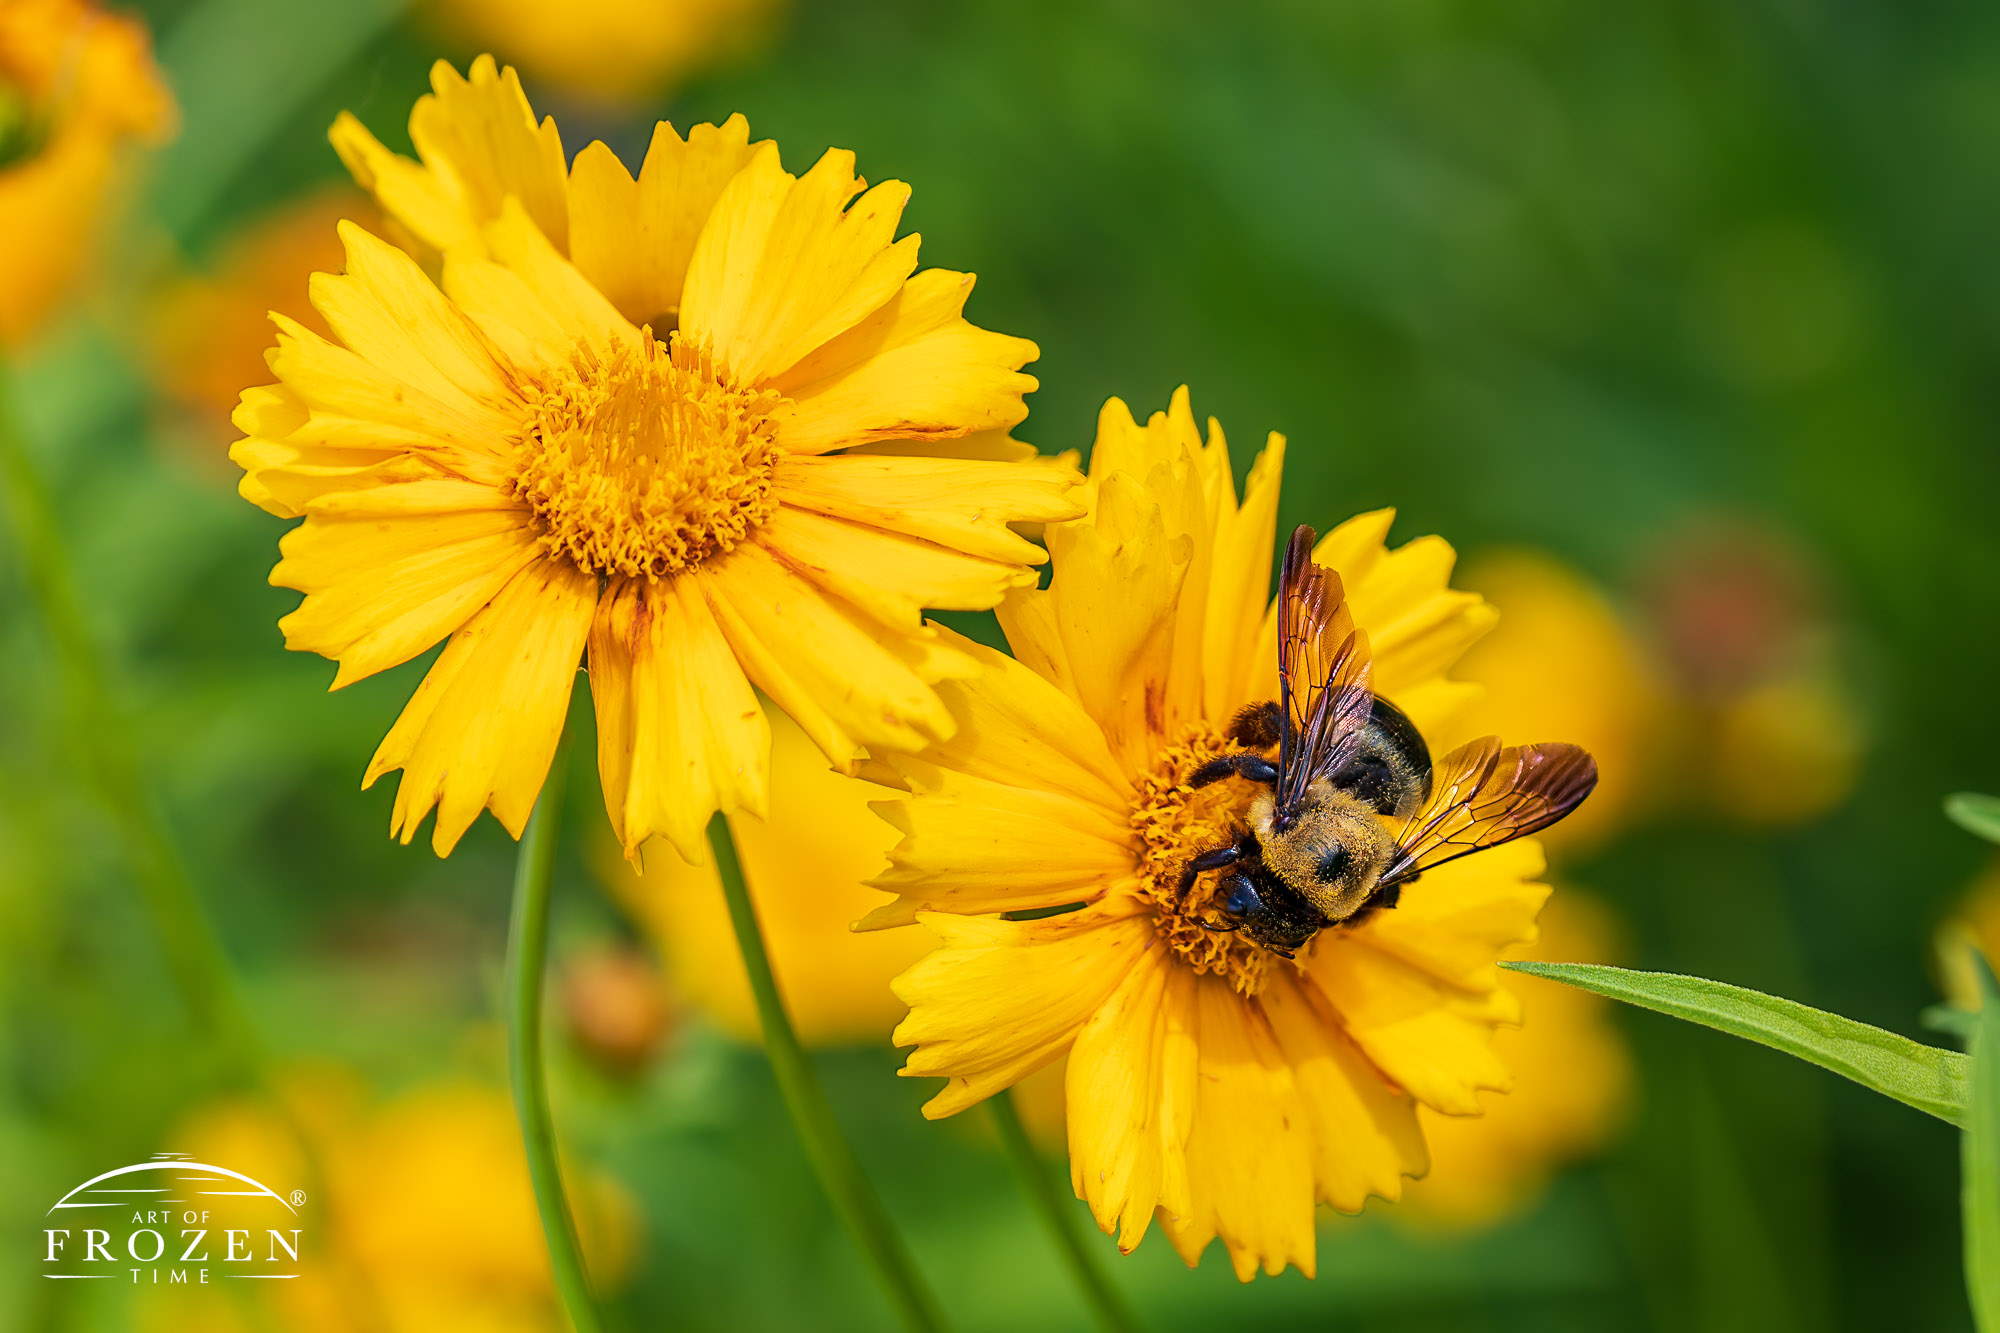 A bee pollinating a bright yellow lance-leaf coreopsis where one sees fine hairs on its head and shiny abdomen reflects the sky.